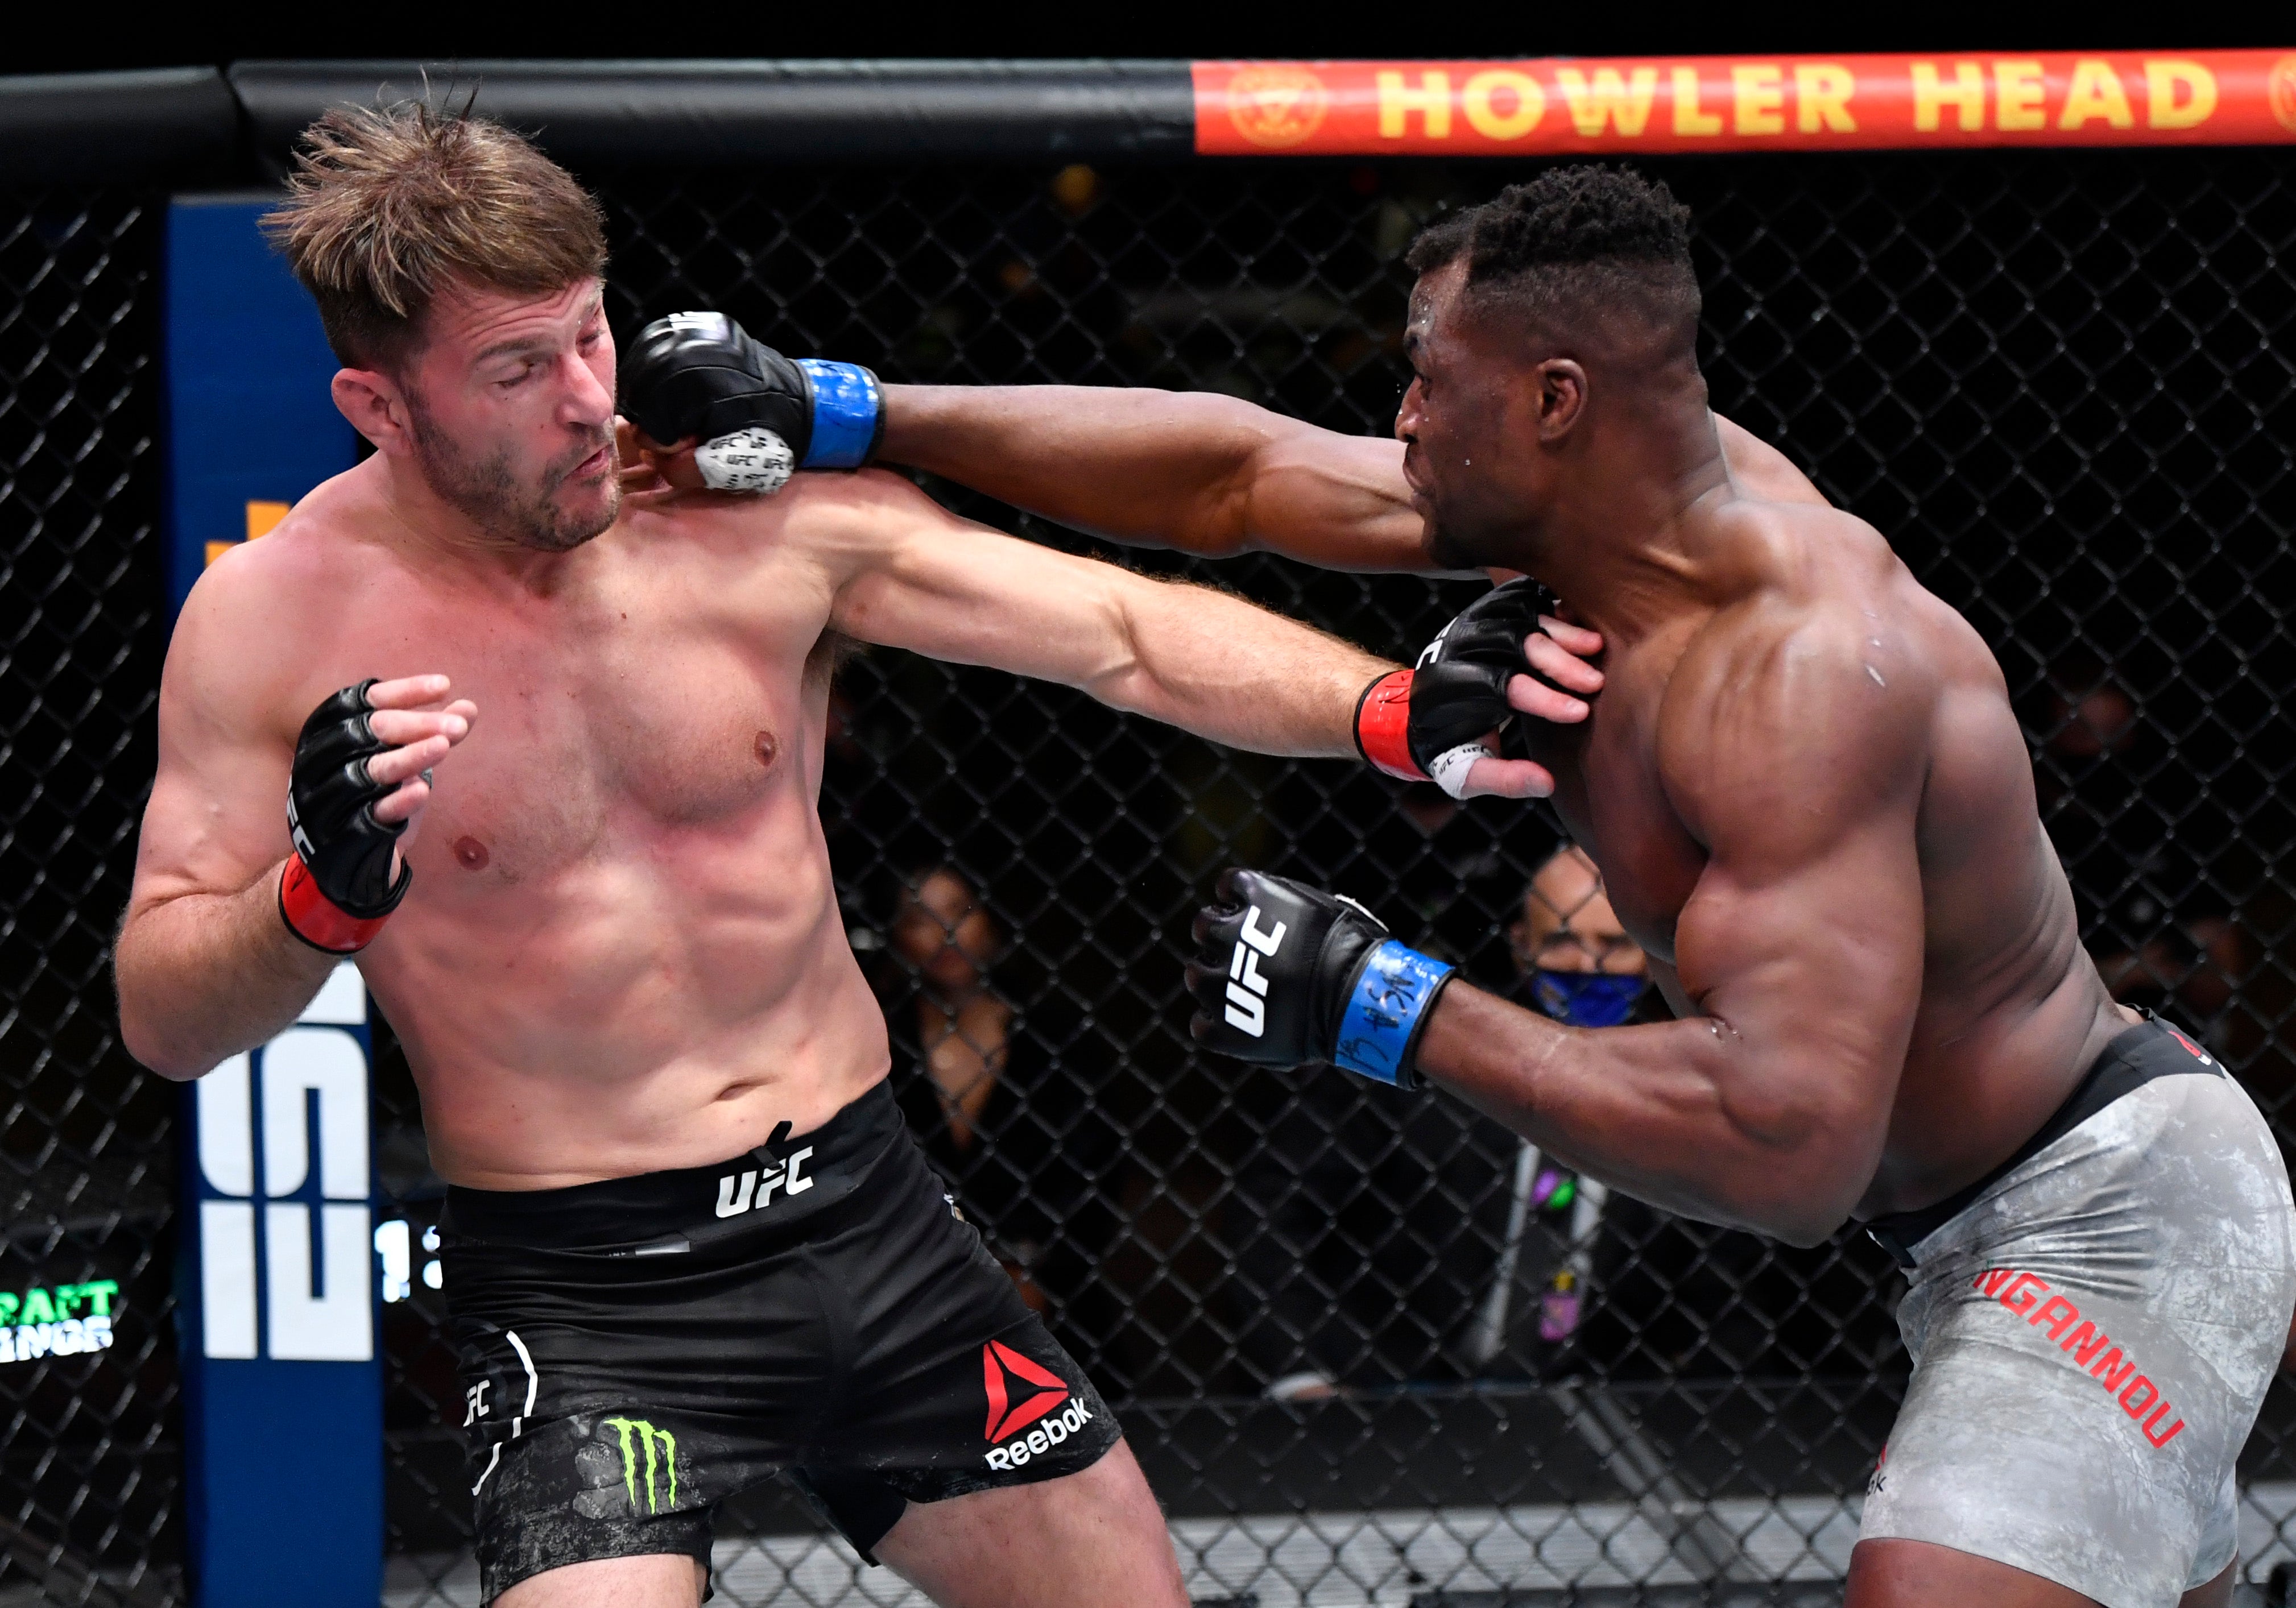 Ngannou knocking out Stipe Miocic to win the UFC heavyweight title in 2020